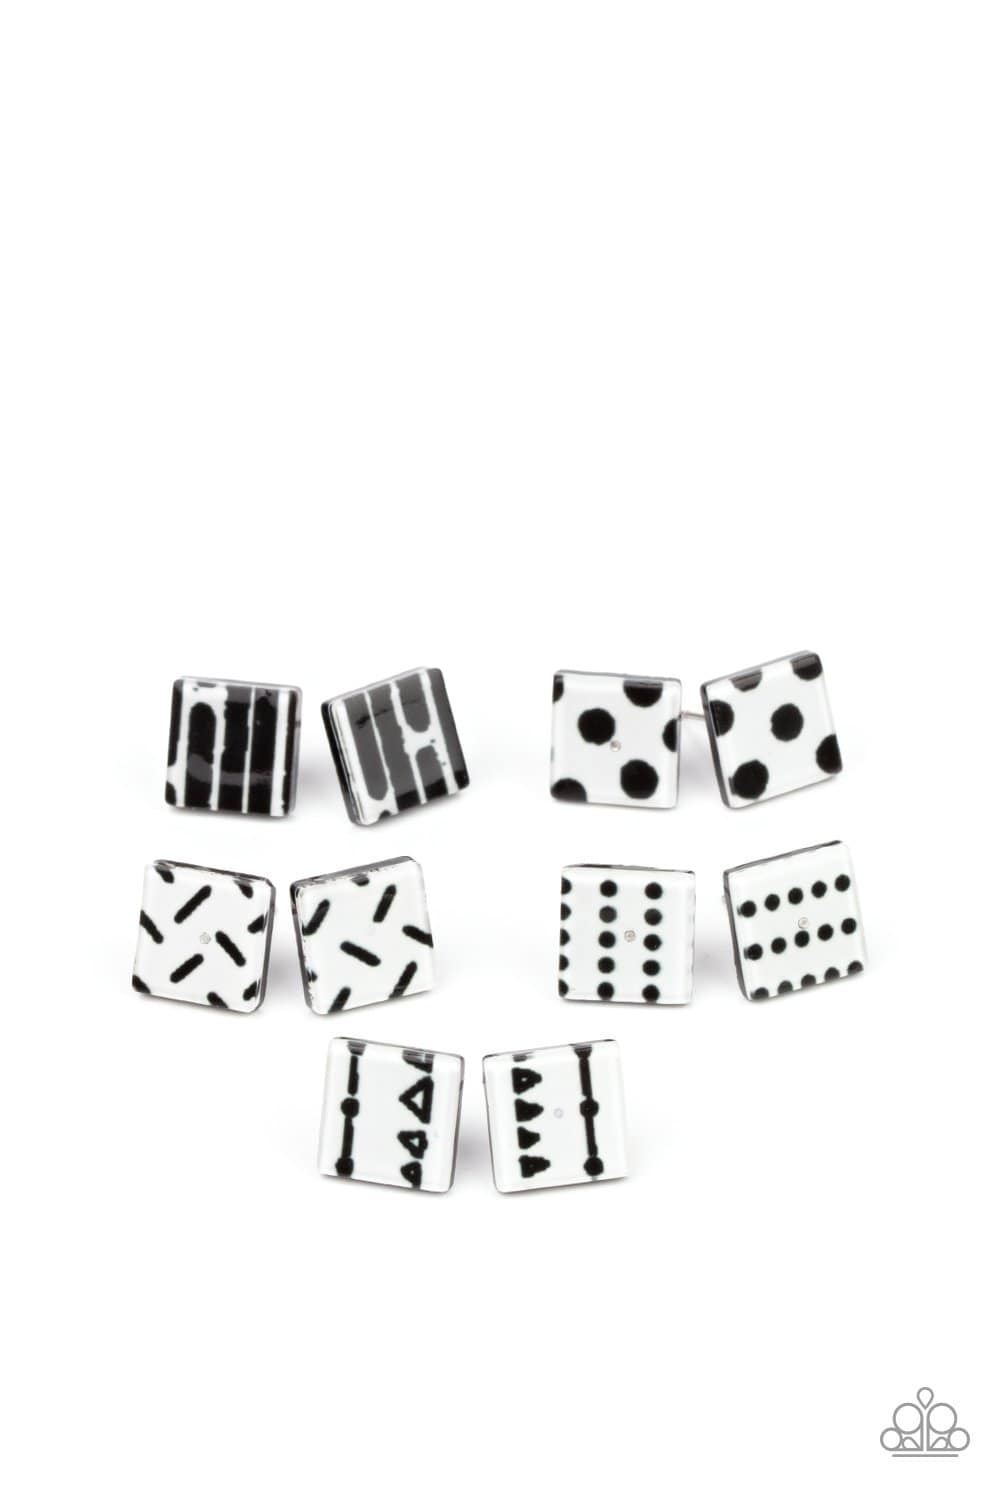 Paparazzi Accessories: Starlet Shimmer Square Black and White Earrings - 5 PACK - Jewels N Thingz Boutique